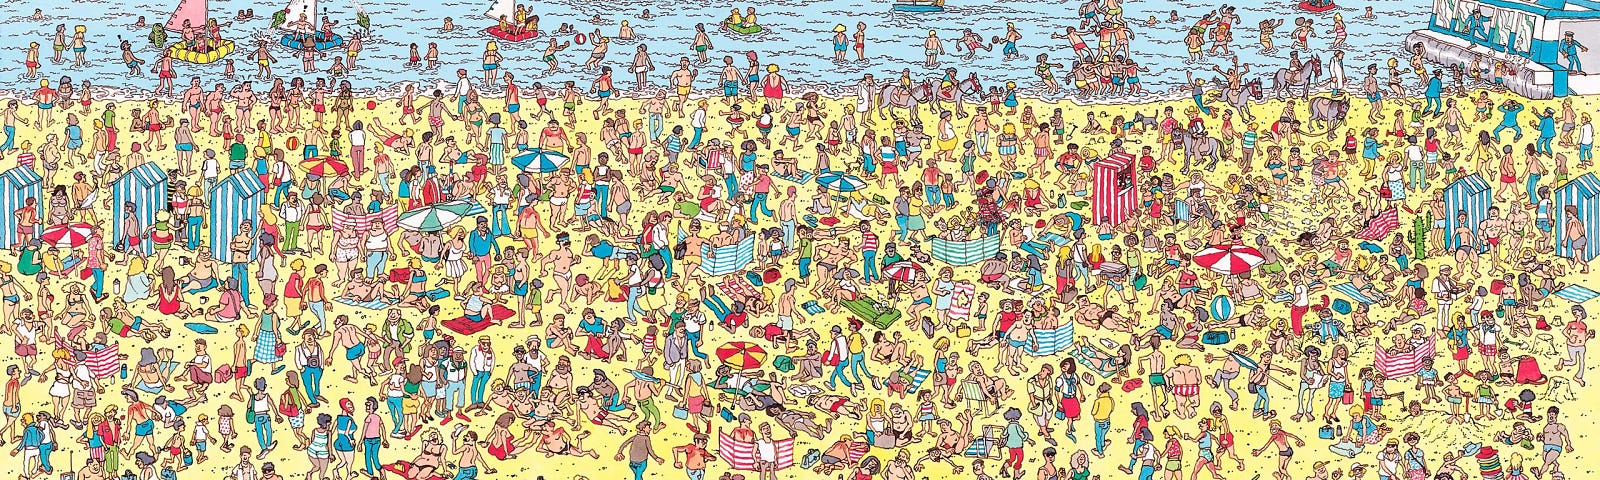 Can You Find Waldo?